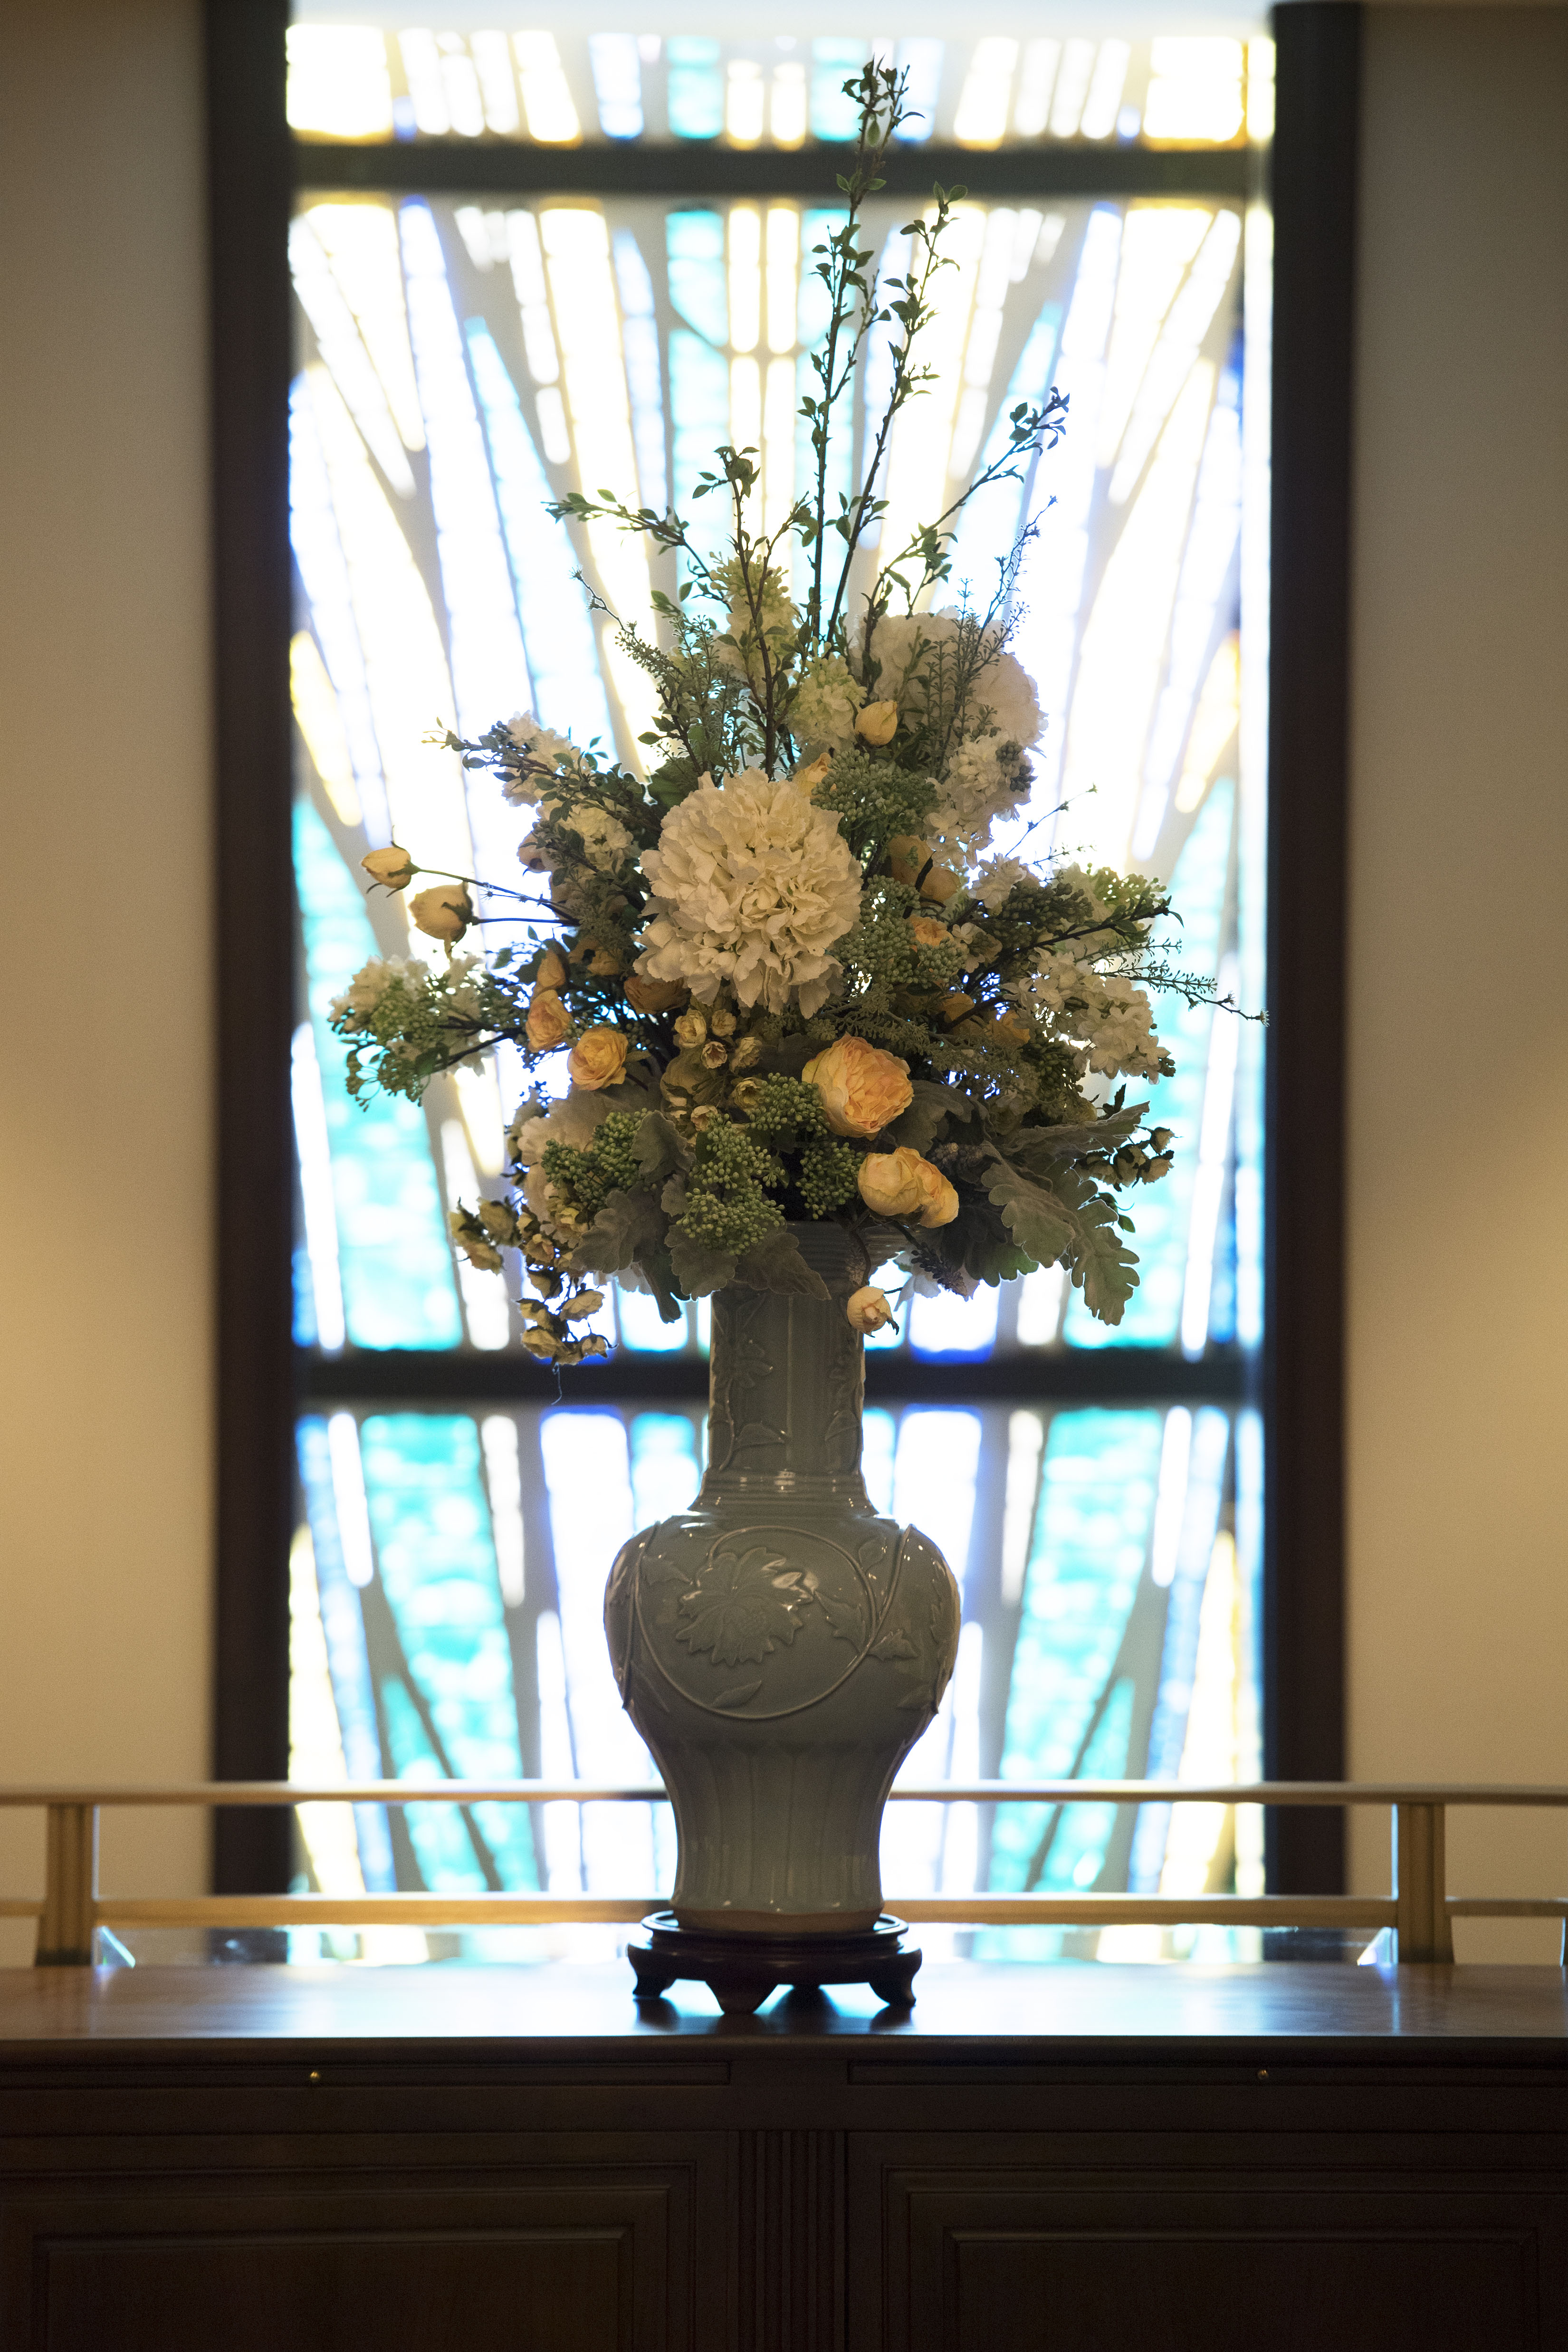 A close-up of flowers in a vase, with an art glass window behind it.